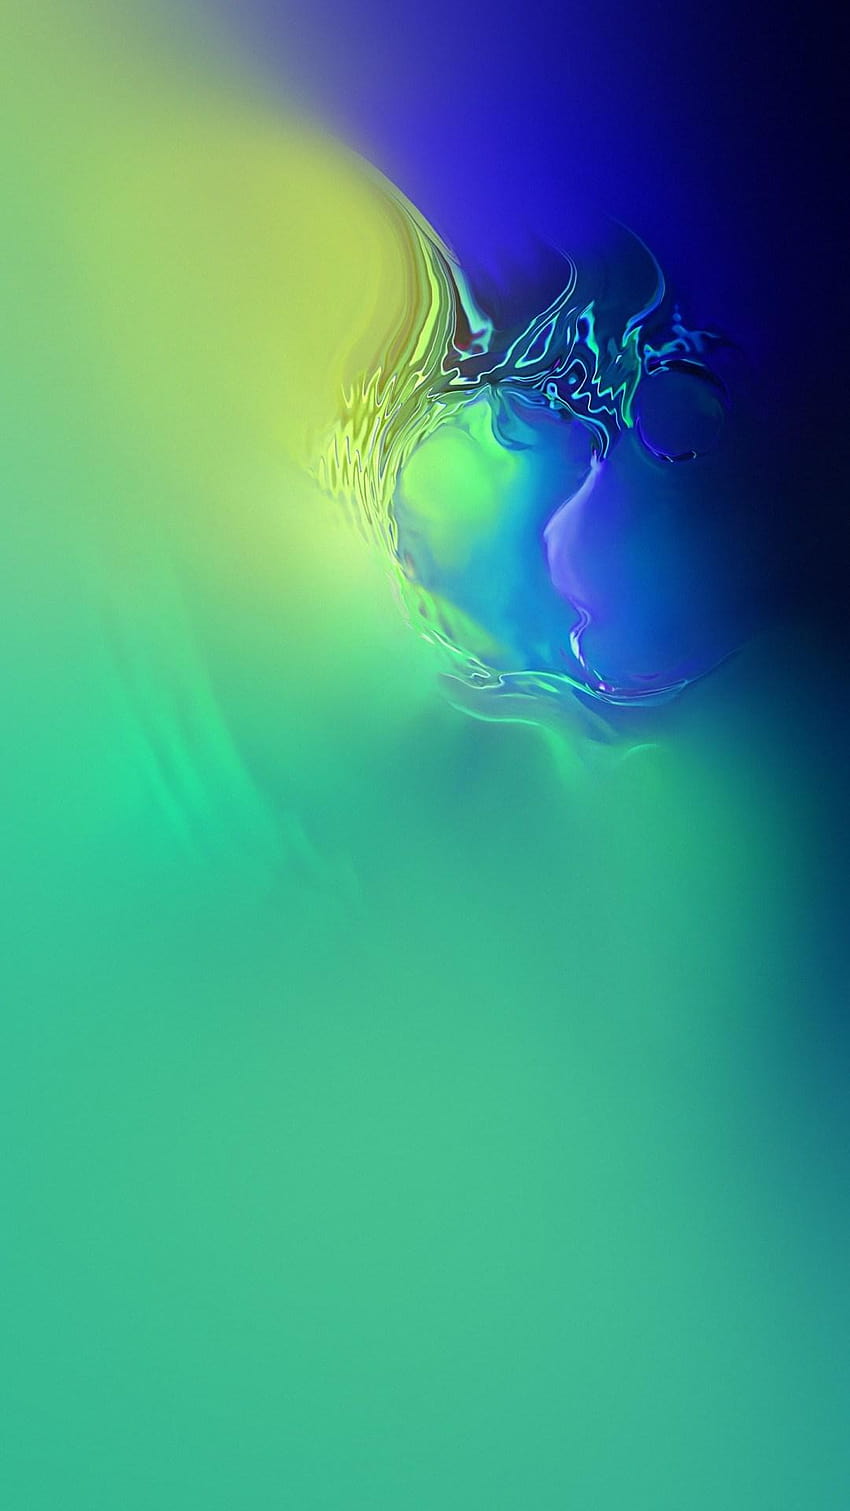 Samsung Galaxy S10 wallpapers. Free download on Mob.org.